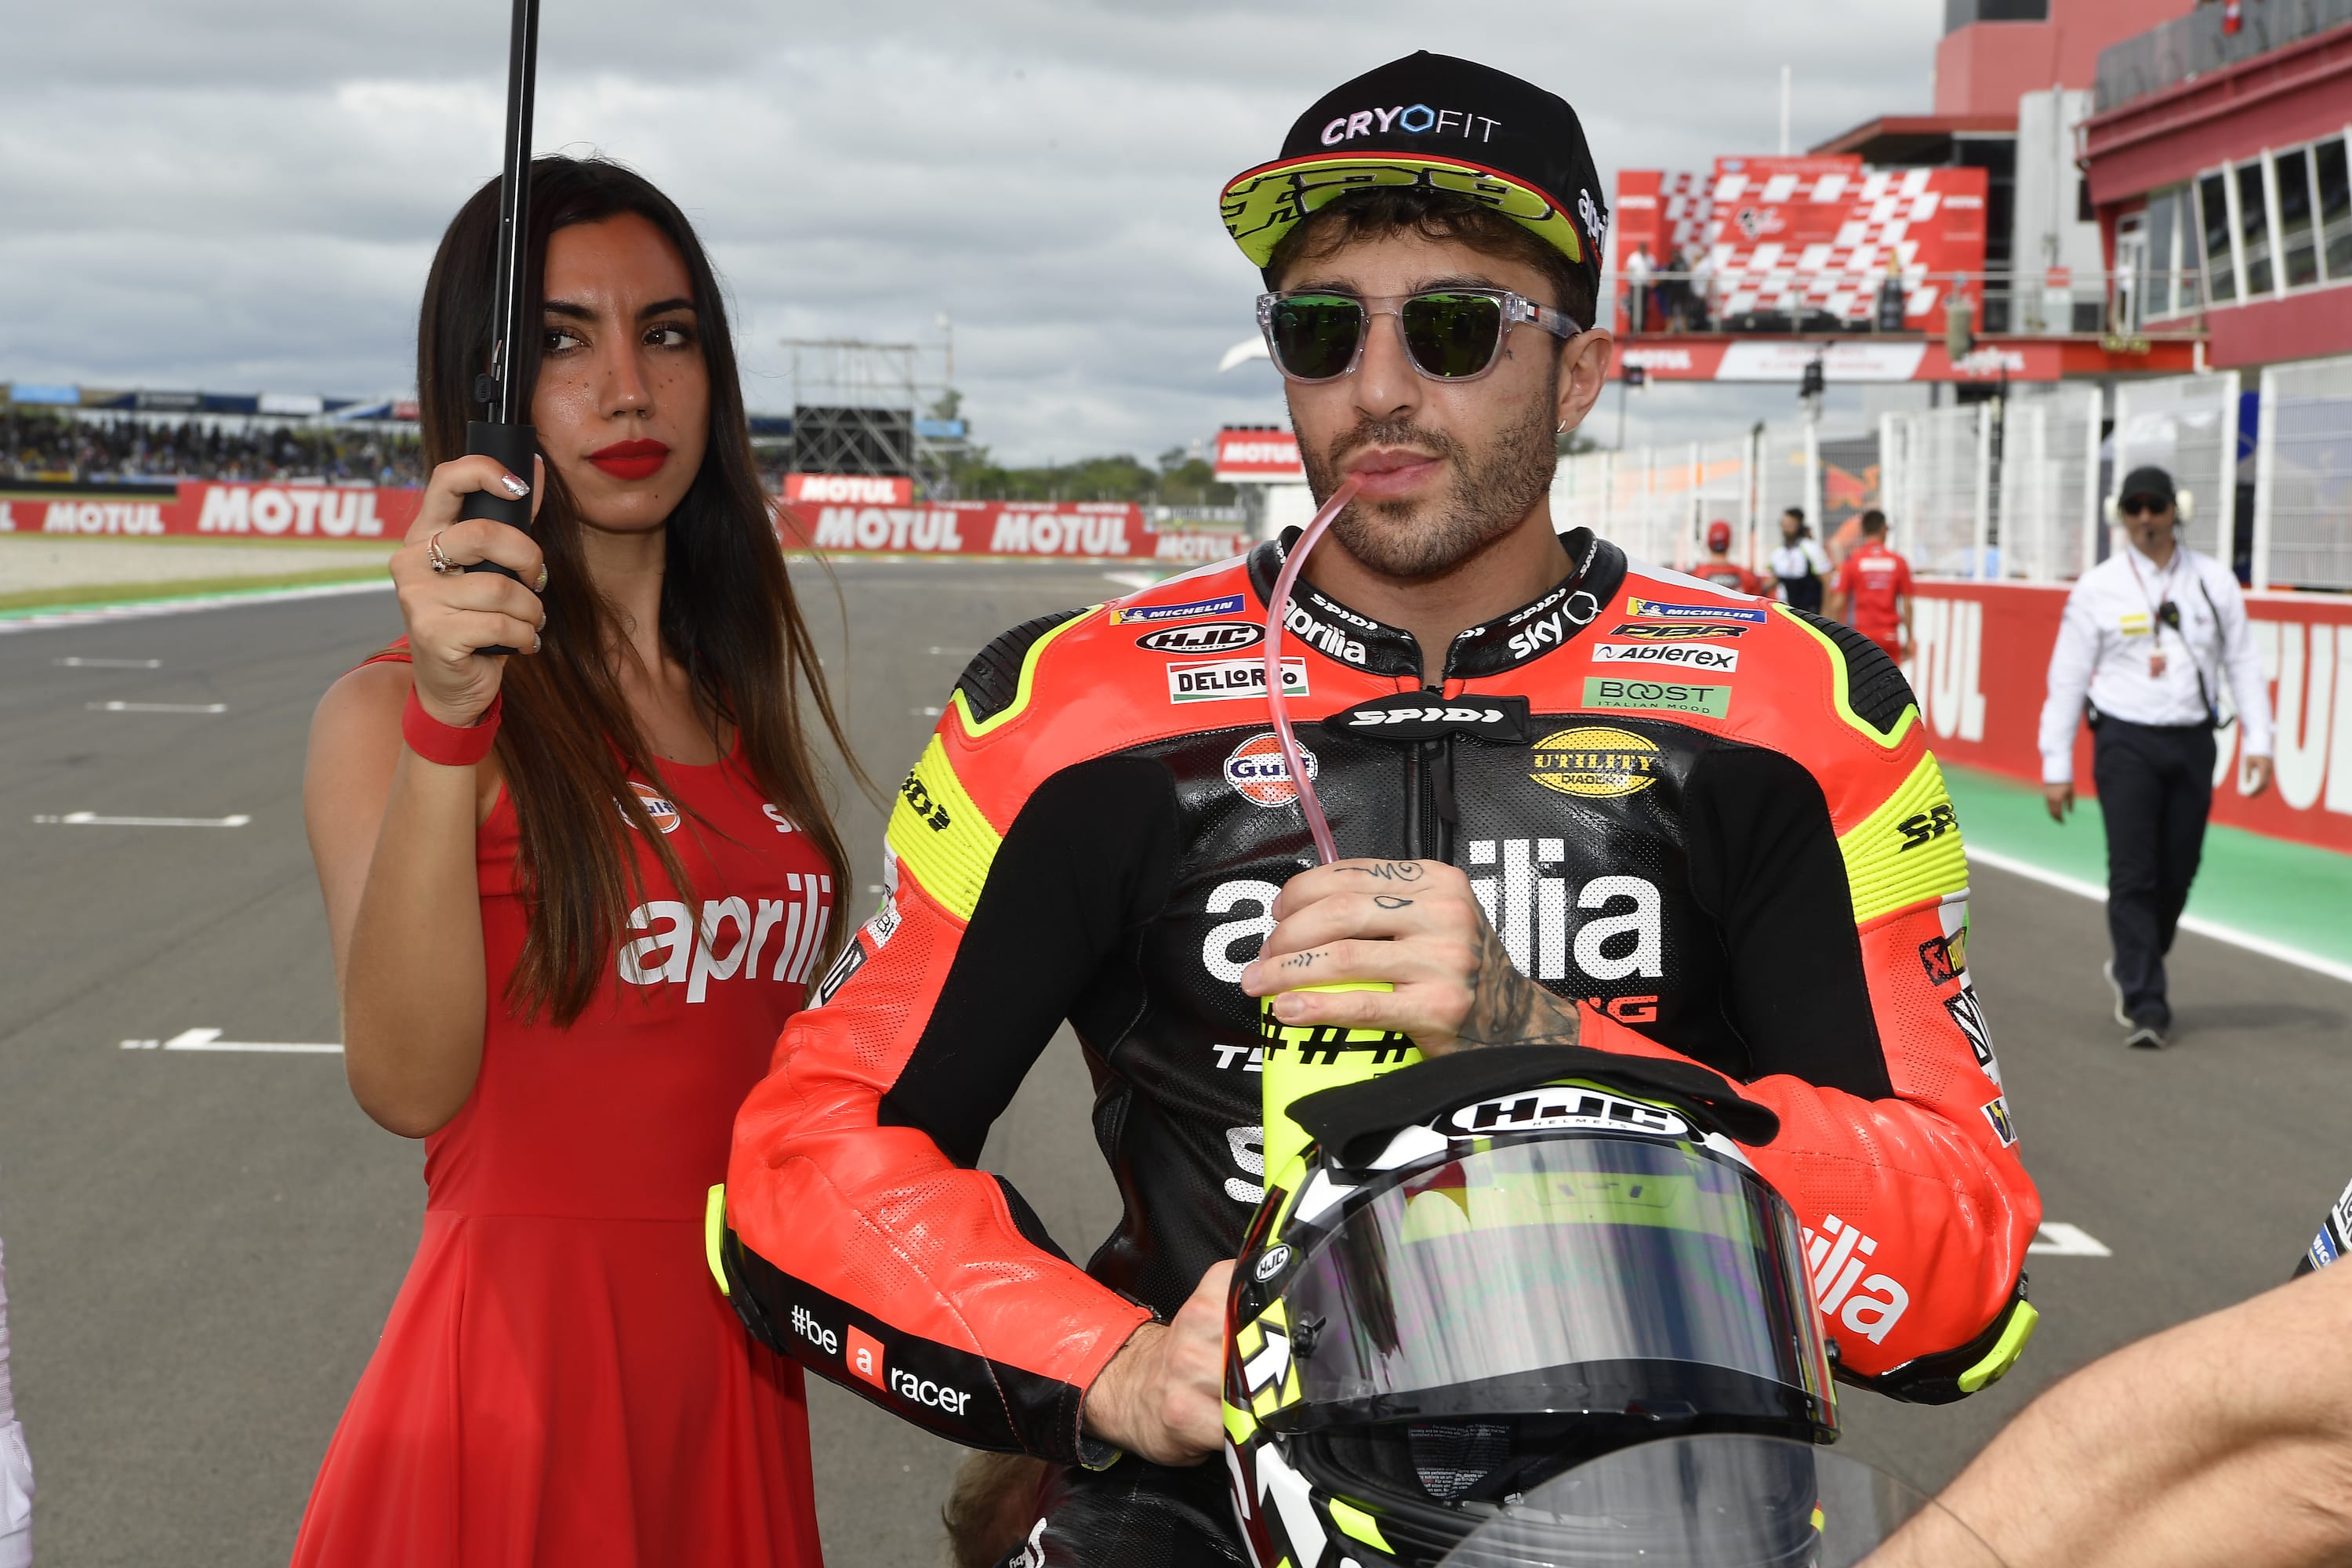 Because of doping allegations against Iannone, Aprilia is looking for possible replacement drivers for the Sepang test
- also in the app Motorcycle News